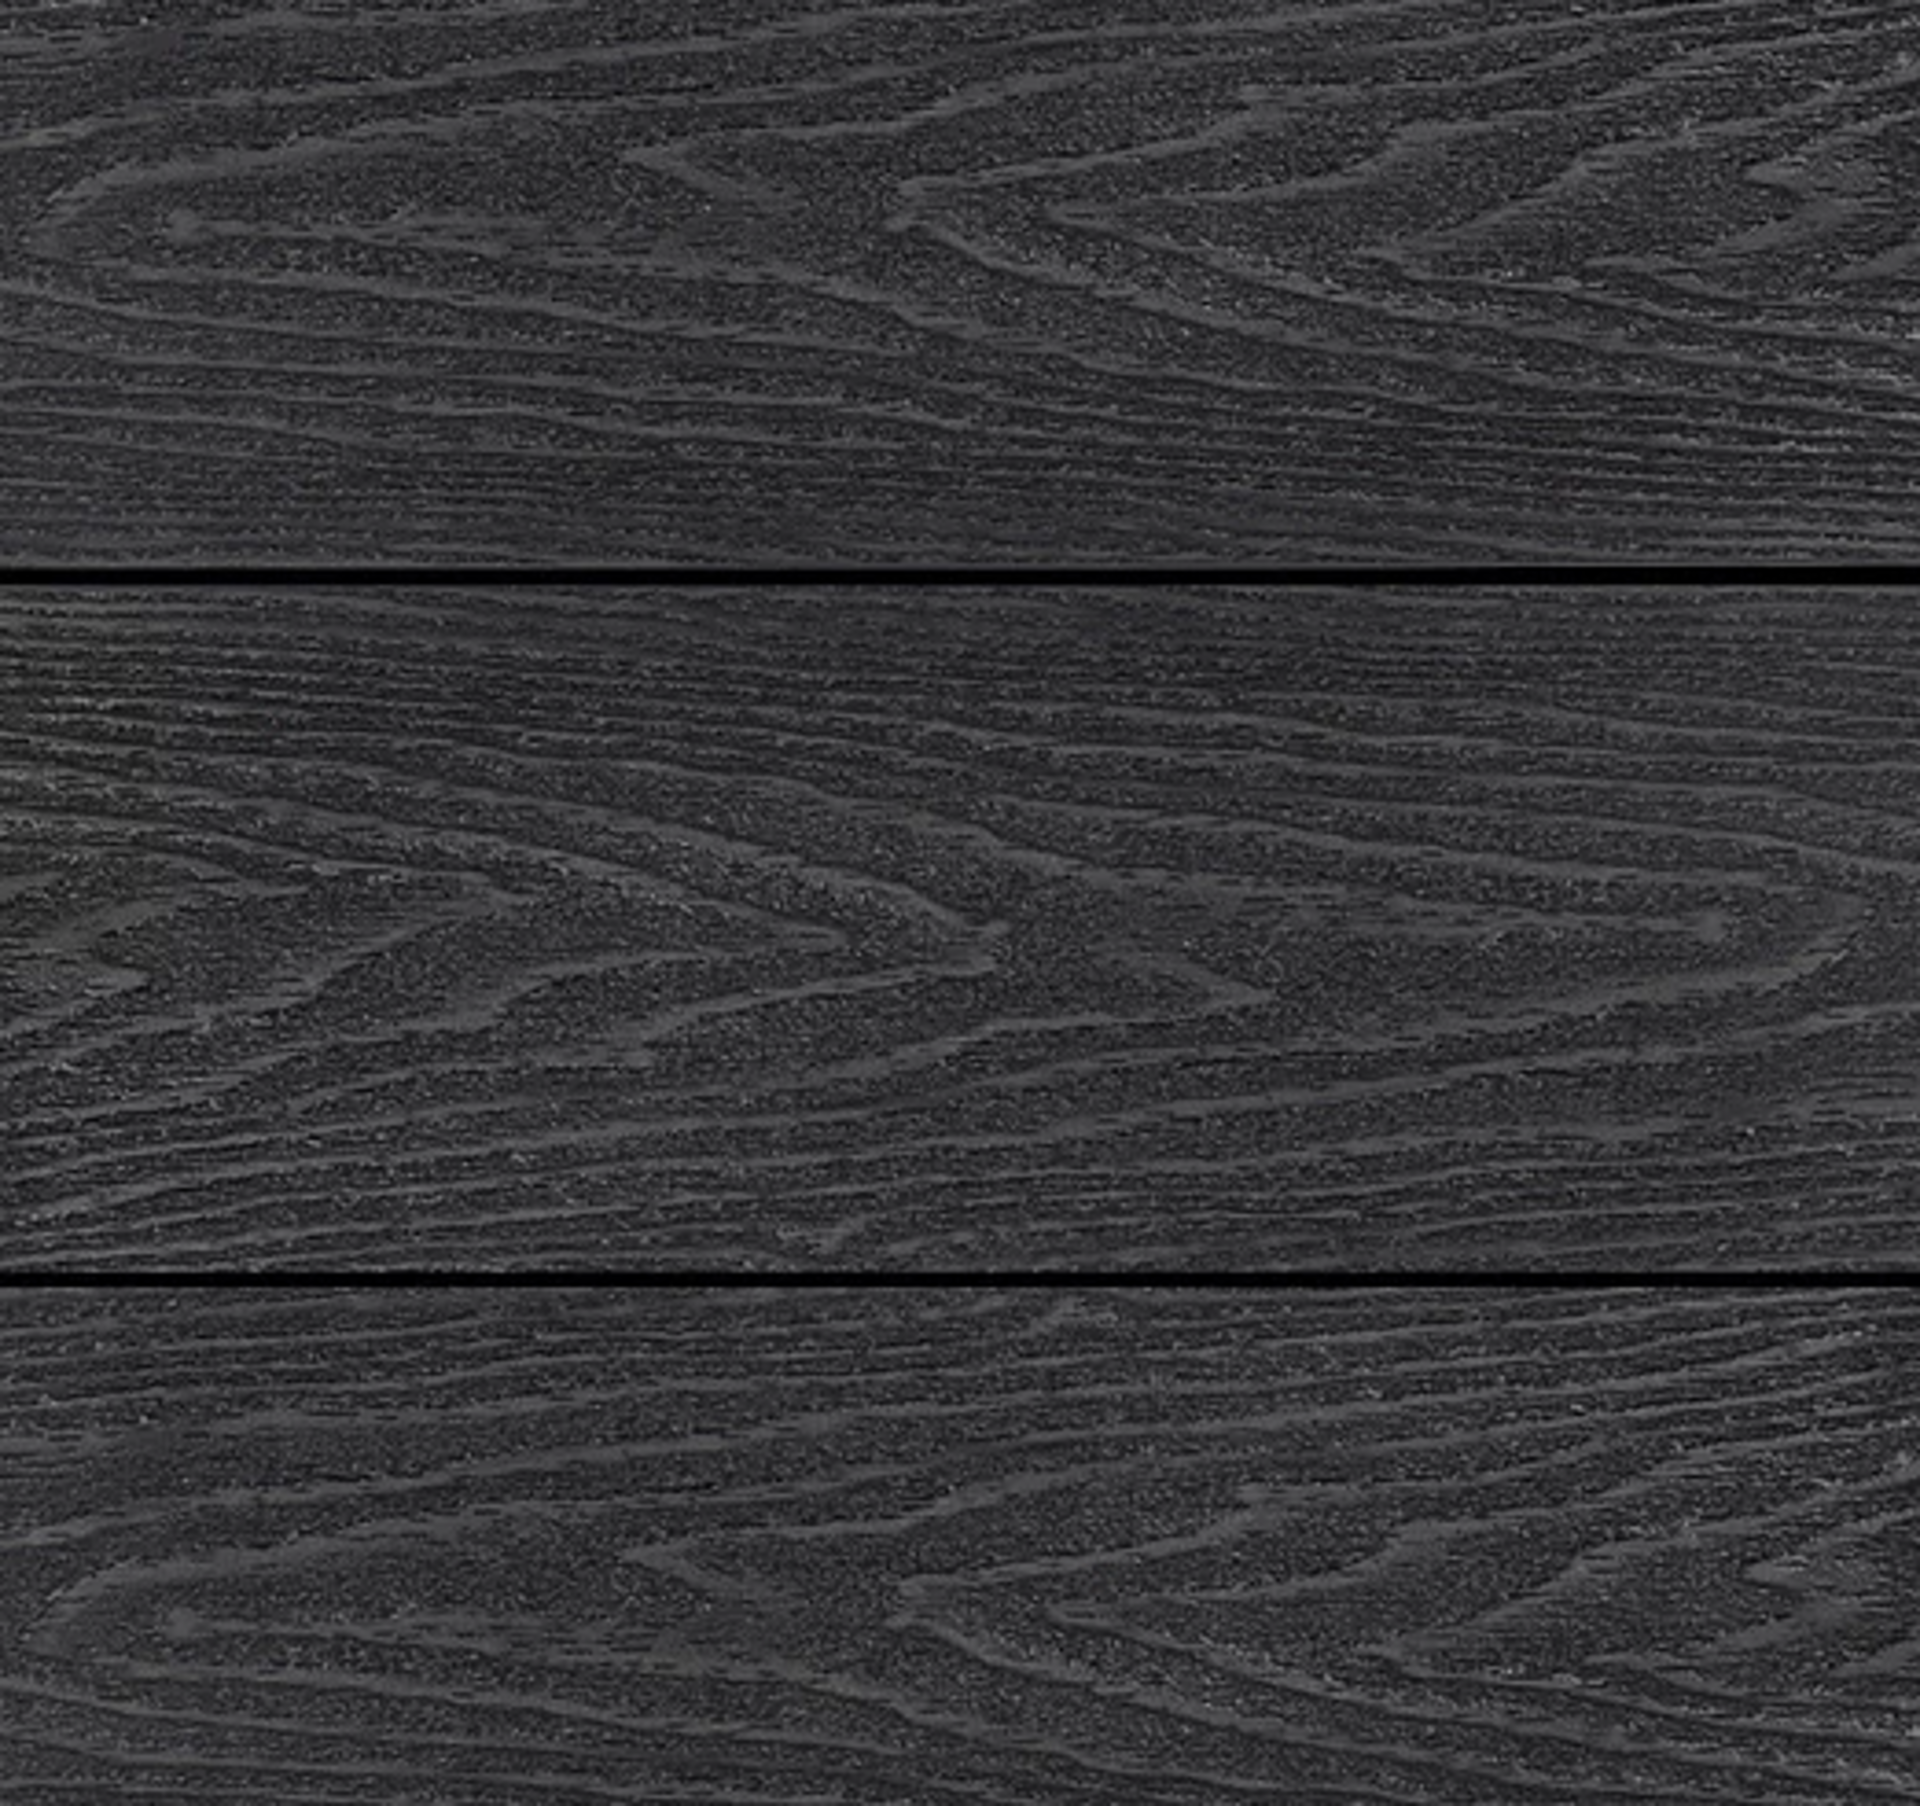 * 20 WPC Composite Dark Grey Double sided Embossed Woodgrain Decking Boards 2900mm x 146mm x 25mm - Image 4 of 4